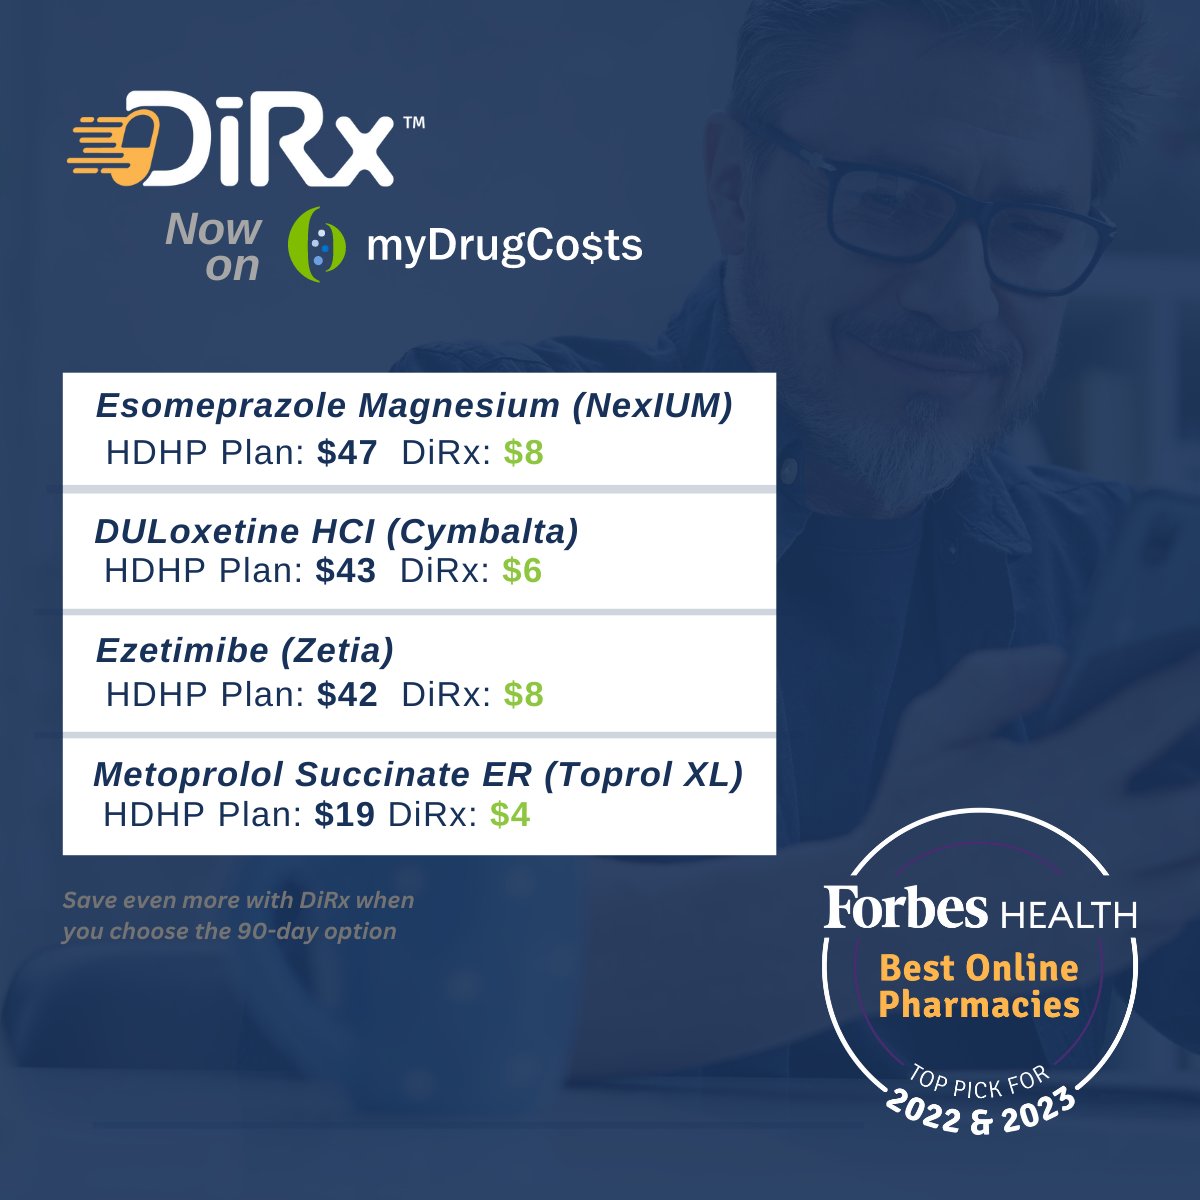 With @DirxHealth added to myDrugCosts, members have more opportunities to save on their medications, with pricing starting as low as $3. 

#hrcommunity #hr #humanresources #employeebenefits #employeeengagement #hrtech #mhealth #healthcare #digitalhealth #health #prescriptiondrugs